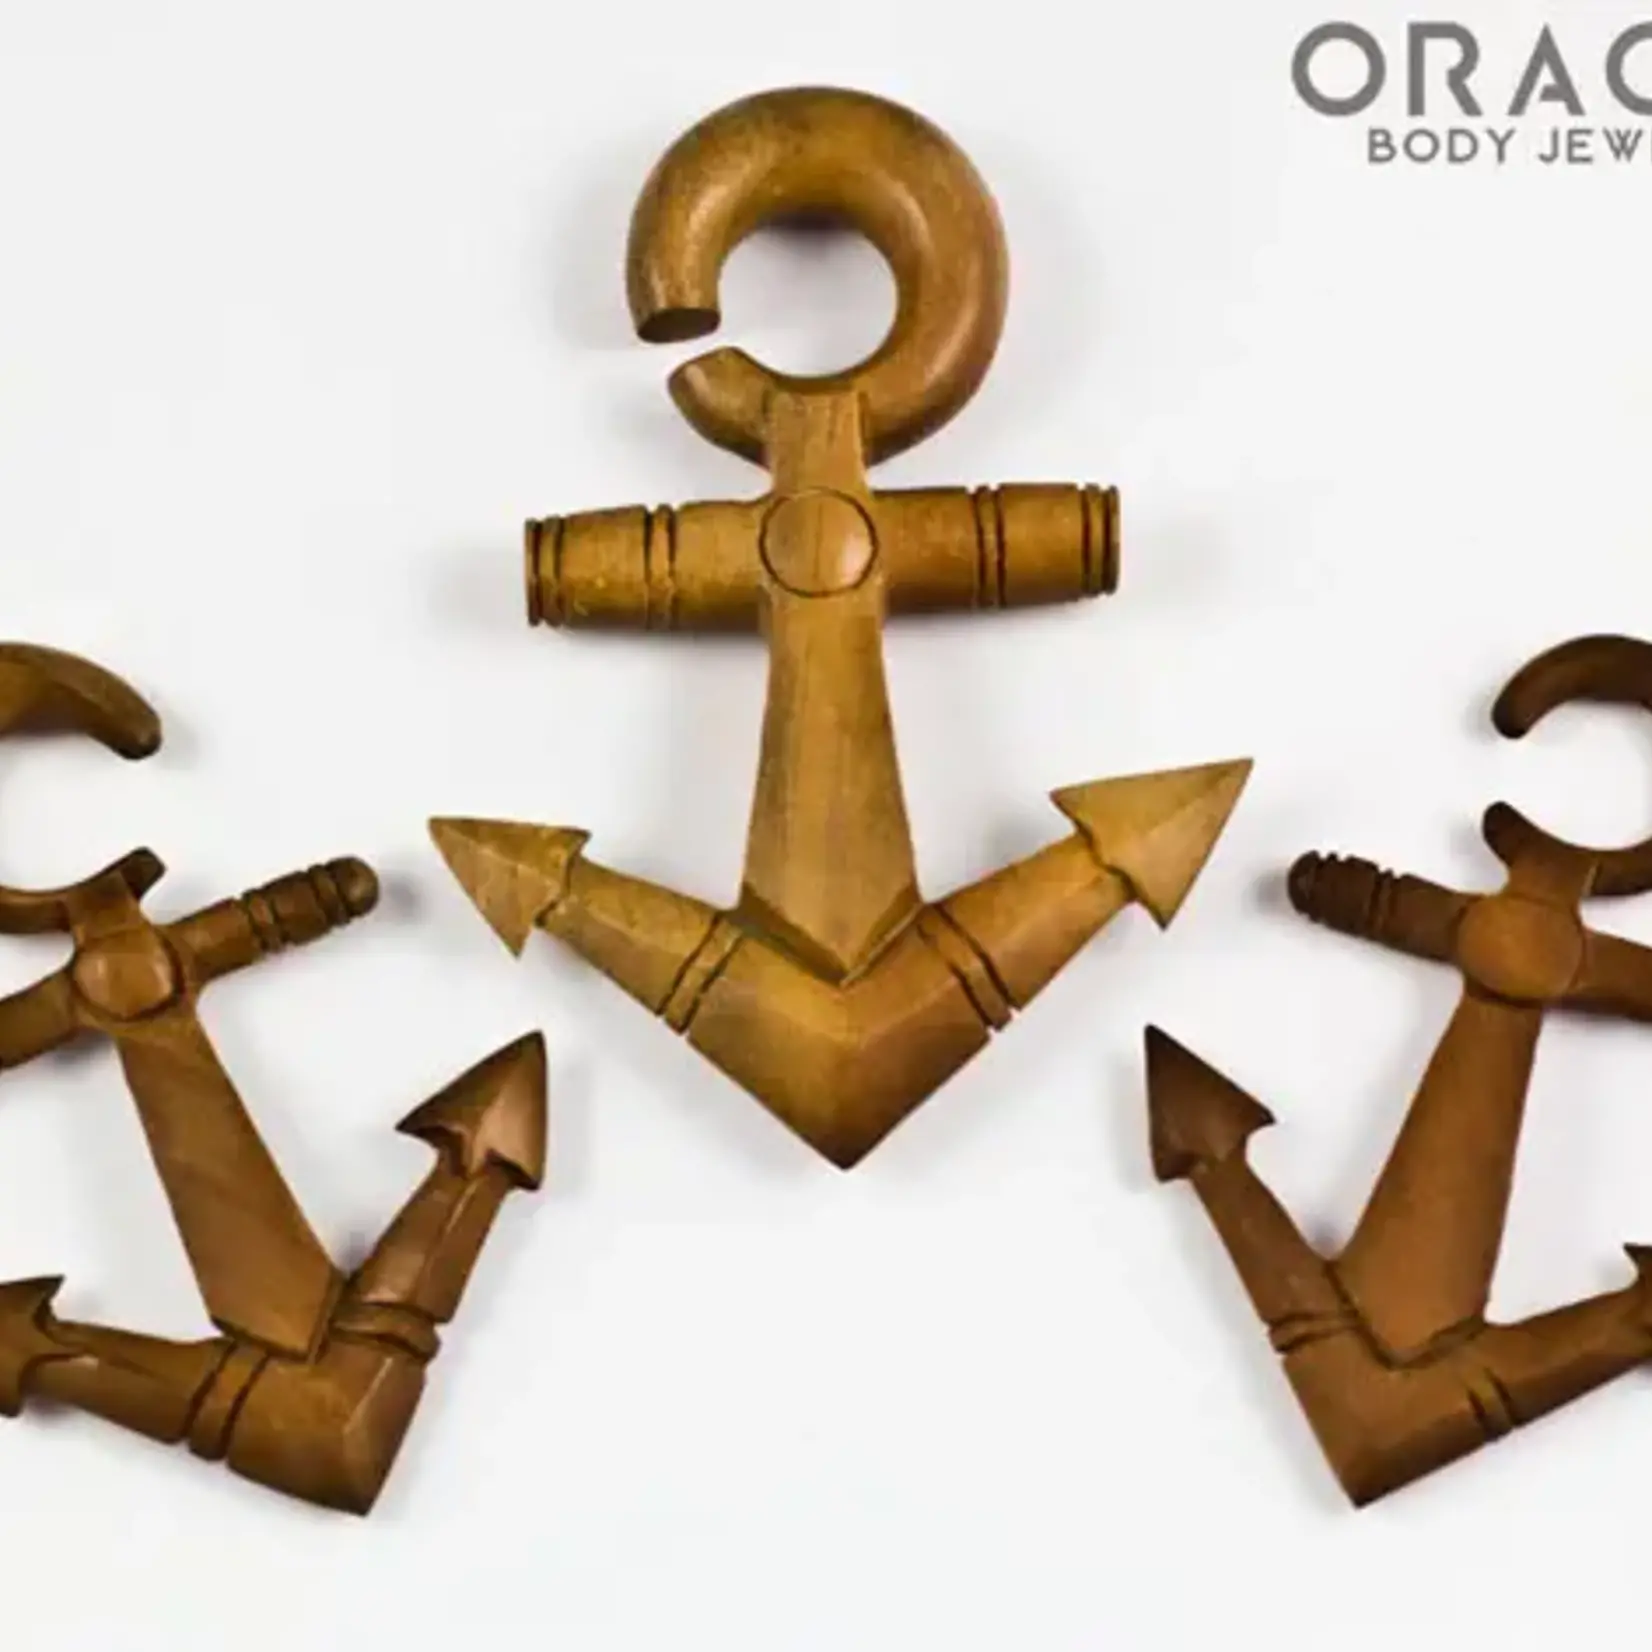 Oracle Oracle Body Jewelry 4g Saba Wood "Anchors Away" hanging design